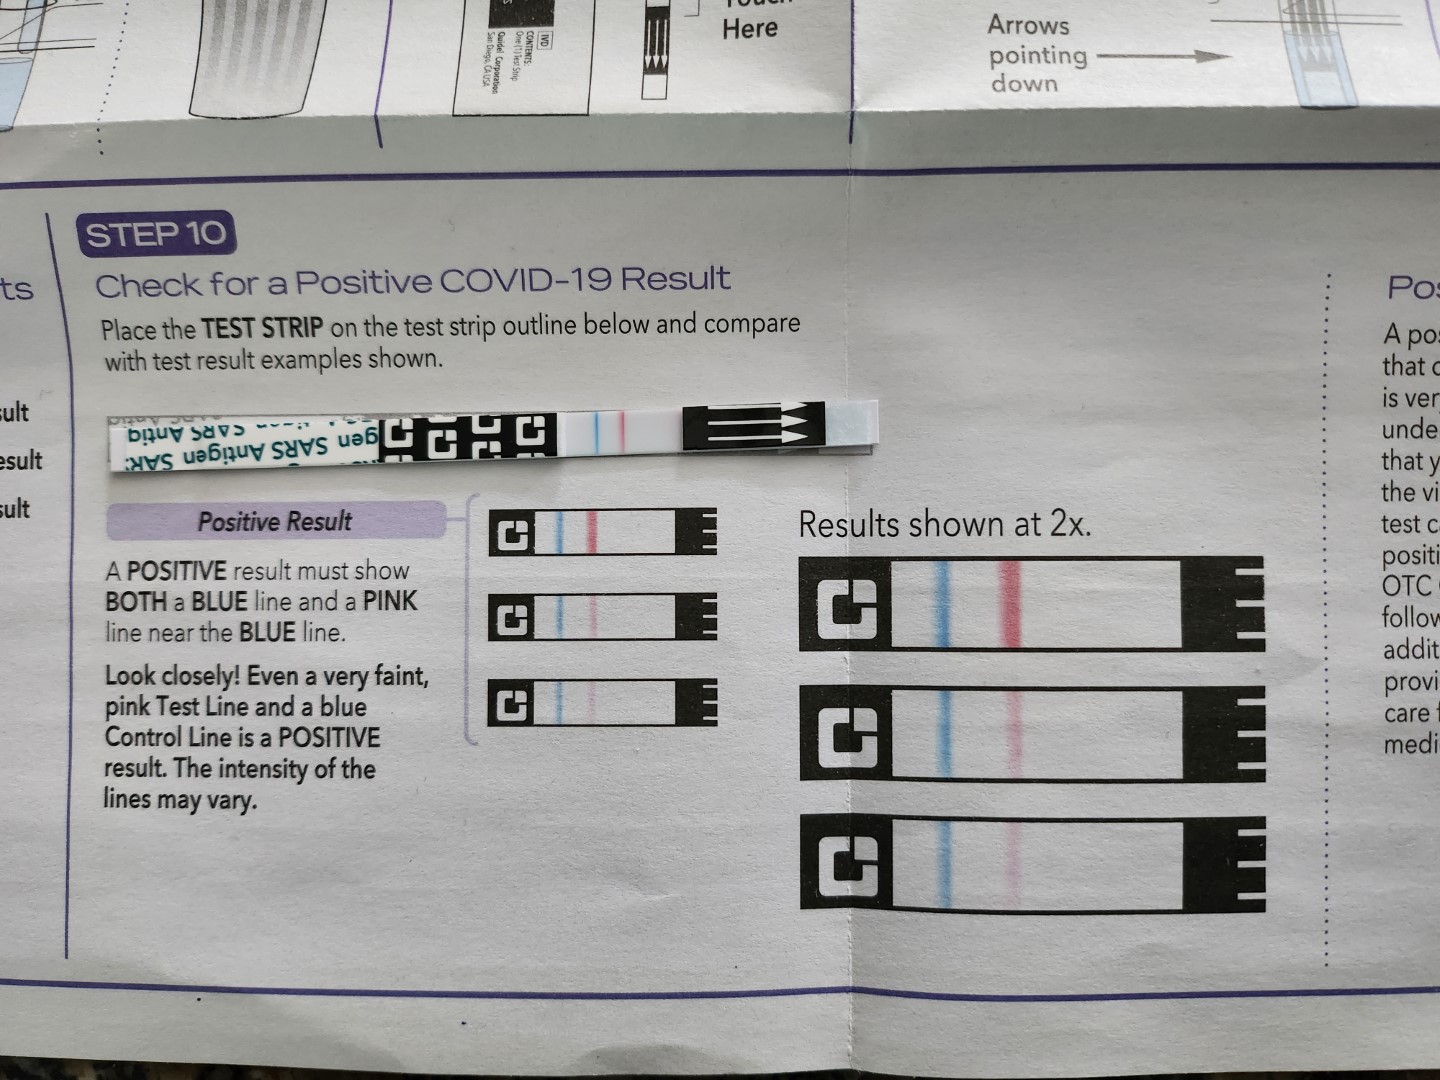 A QuickVue rapid test showing red and blue lines, which is a positive result